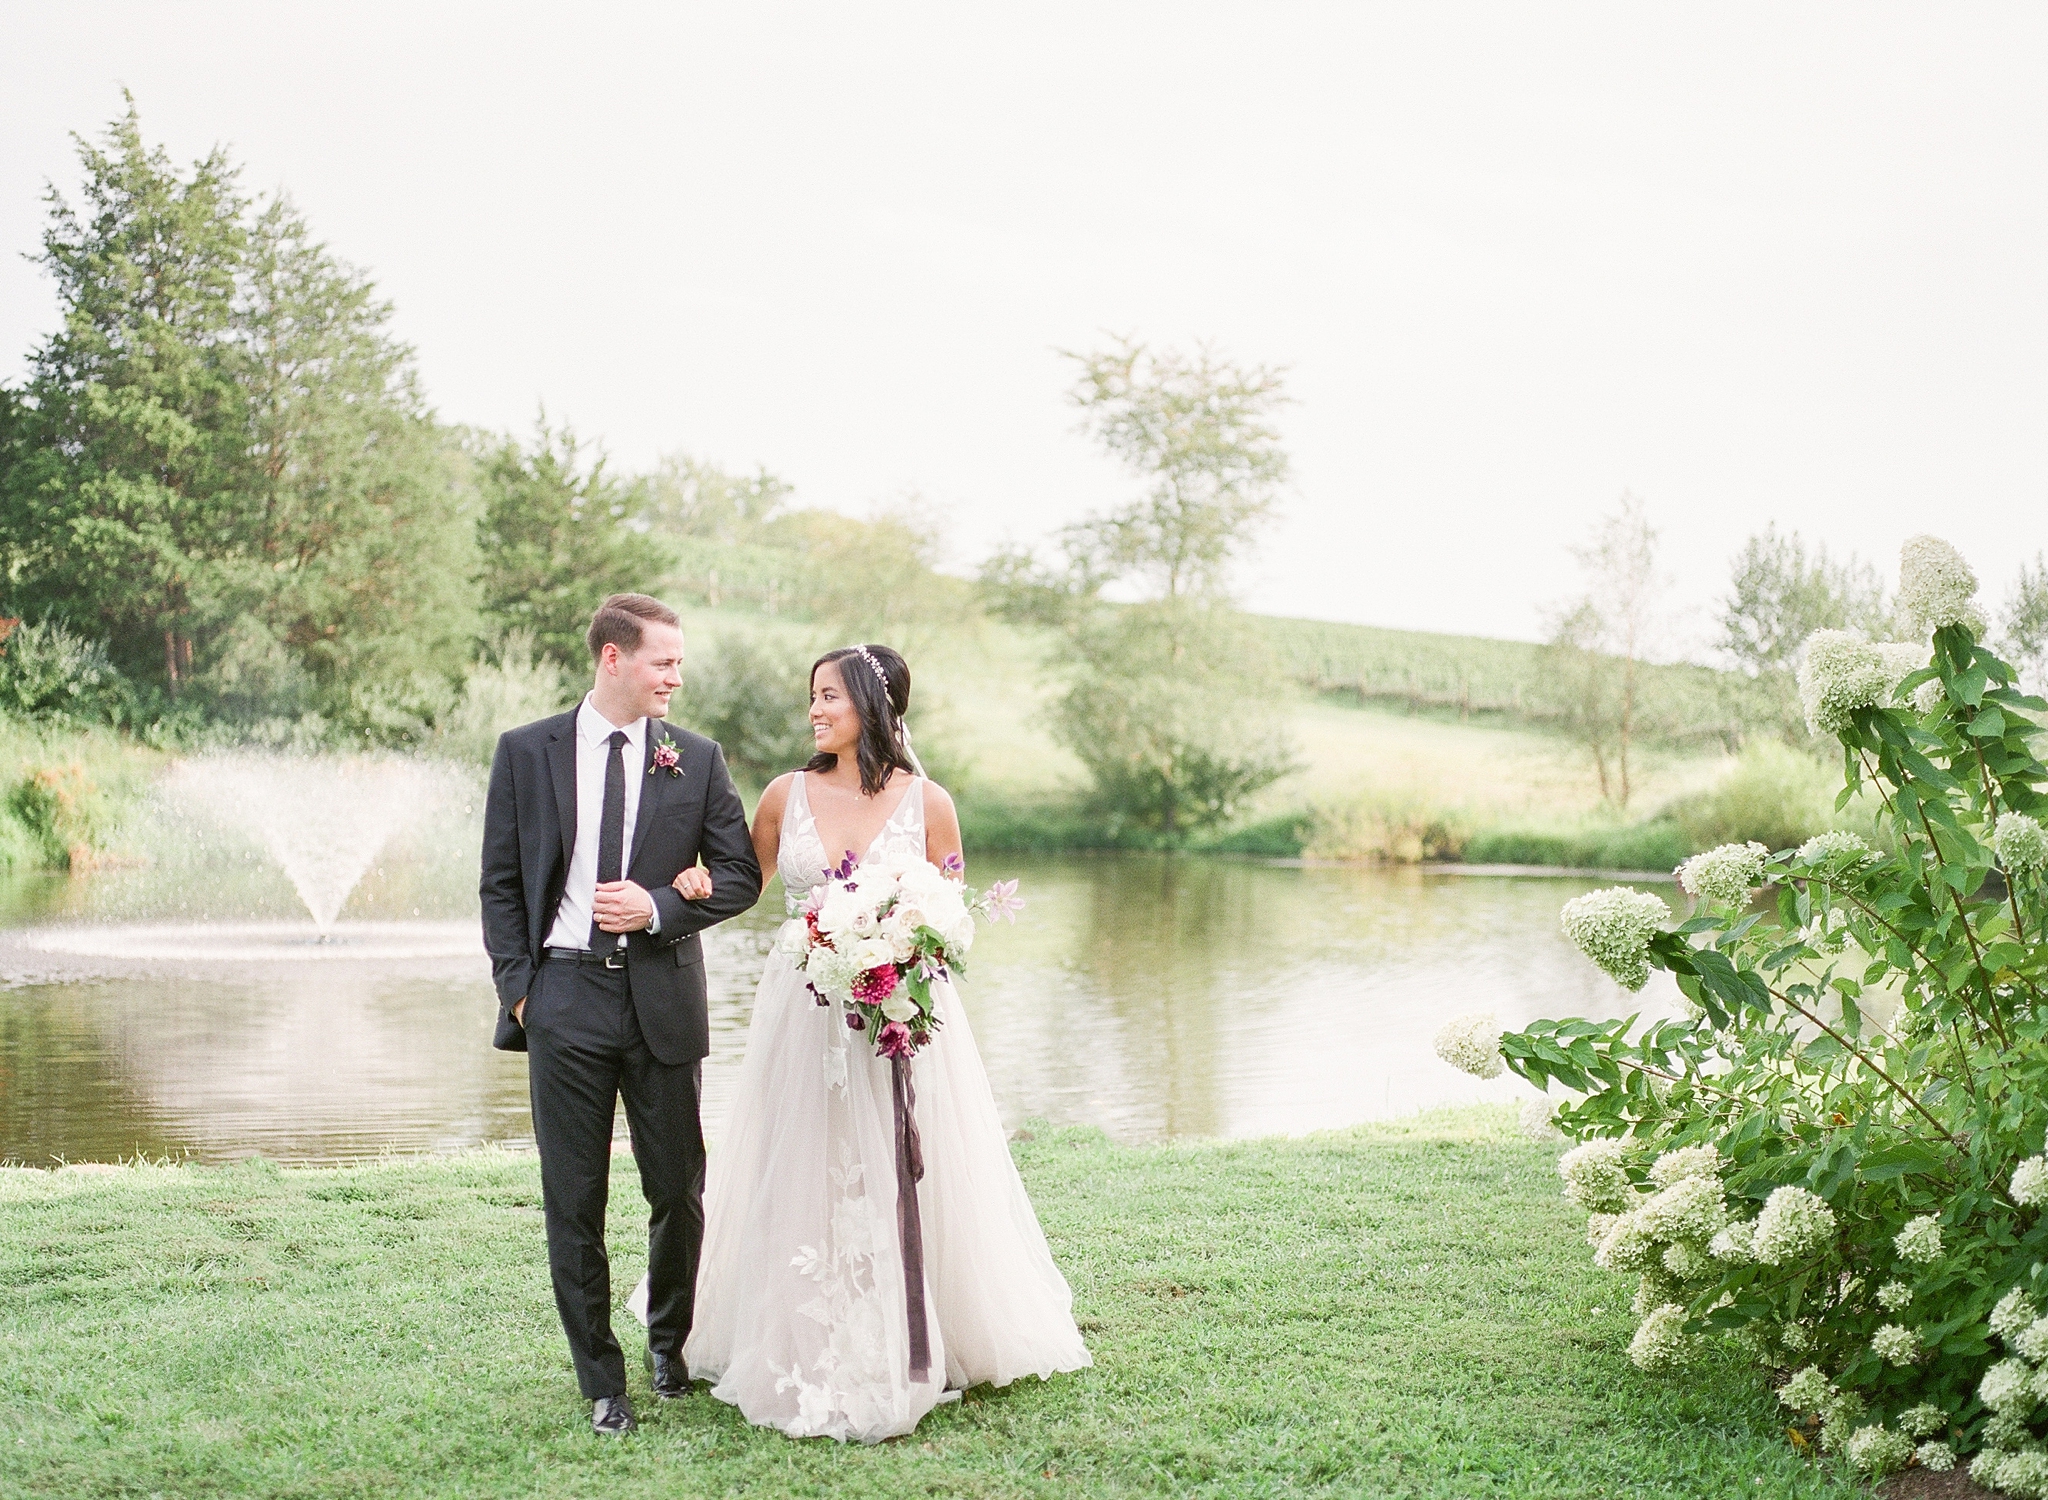 An intimate and romantic wedding at Stone Tower Winery in Leesburg, VA that features a 'figs and blues' theme with a fun play on color for the fall season.